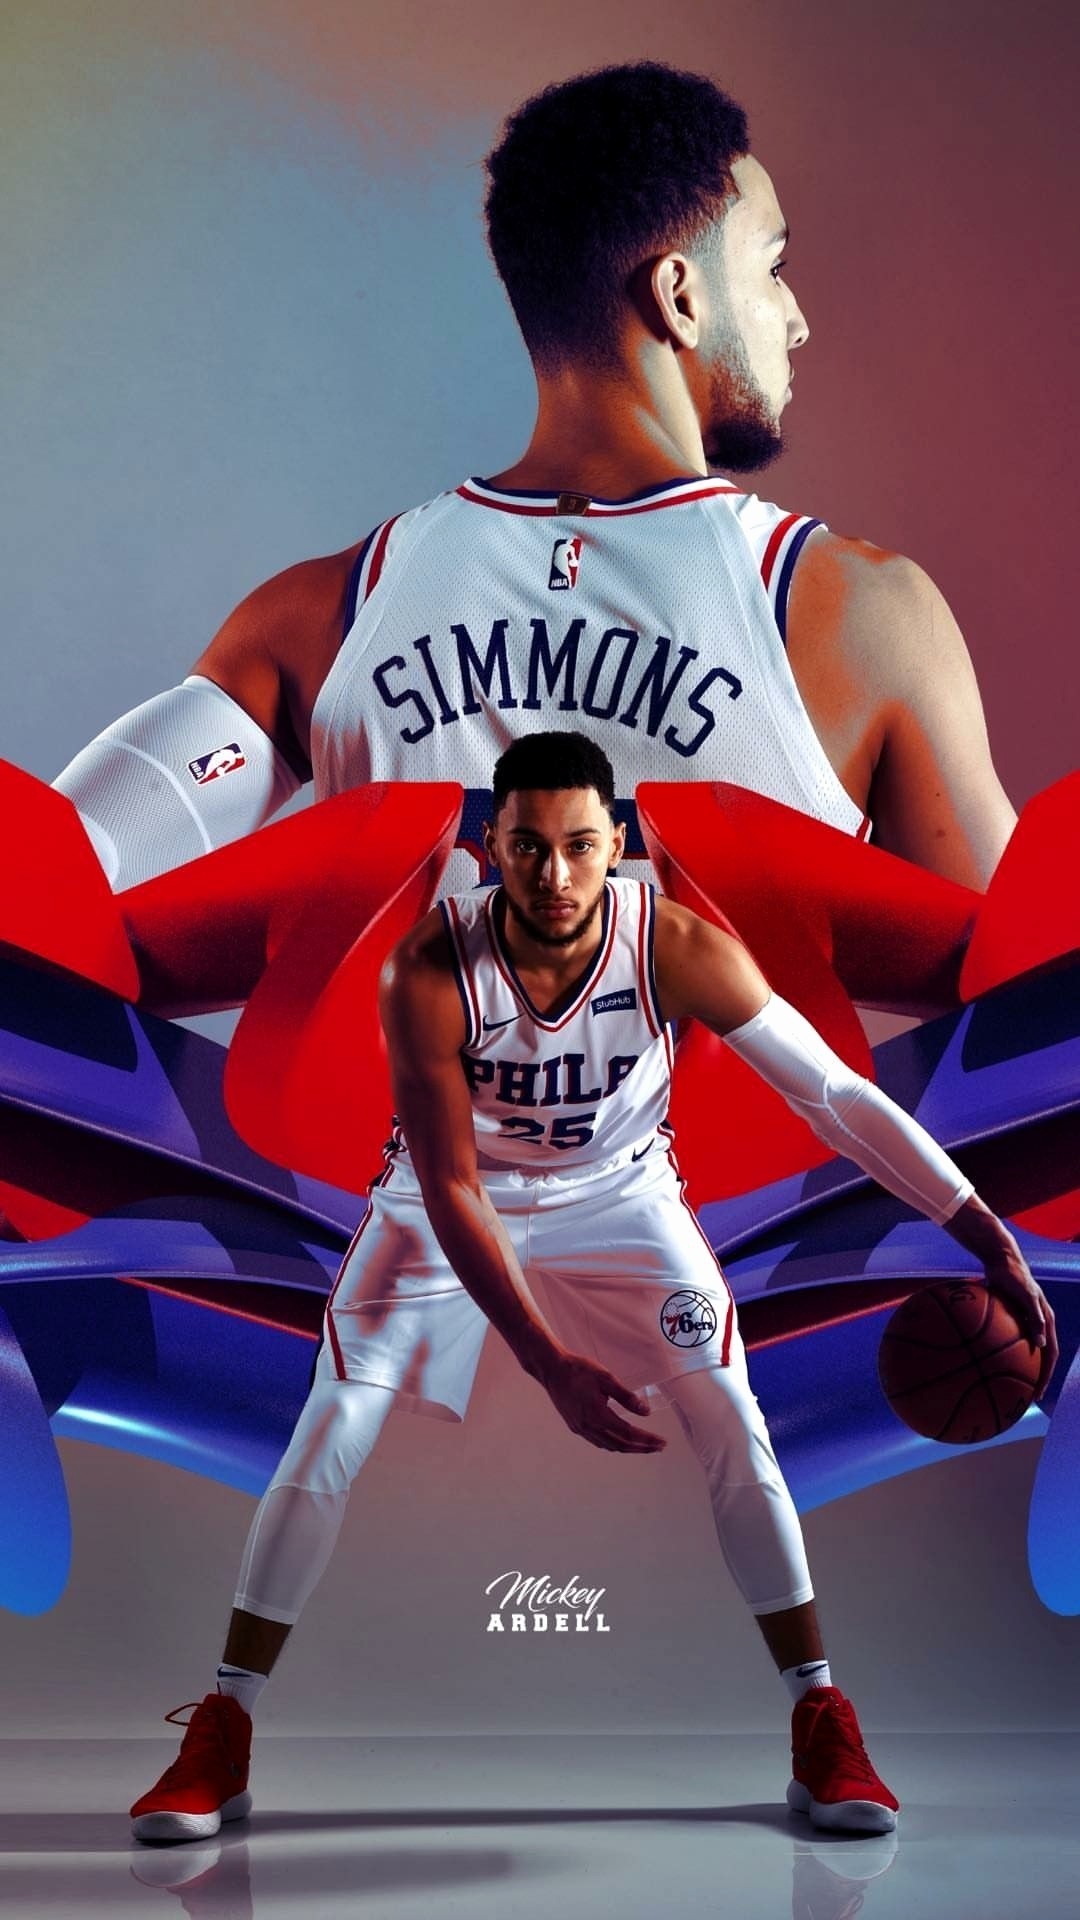 Sixers wallpaper for android